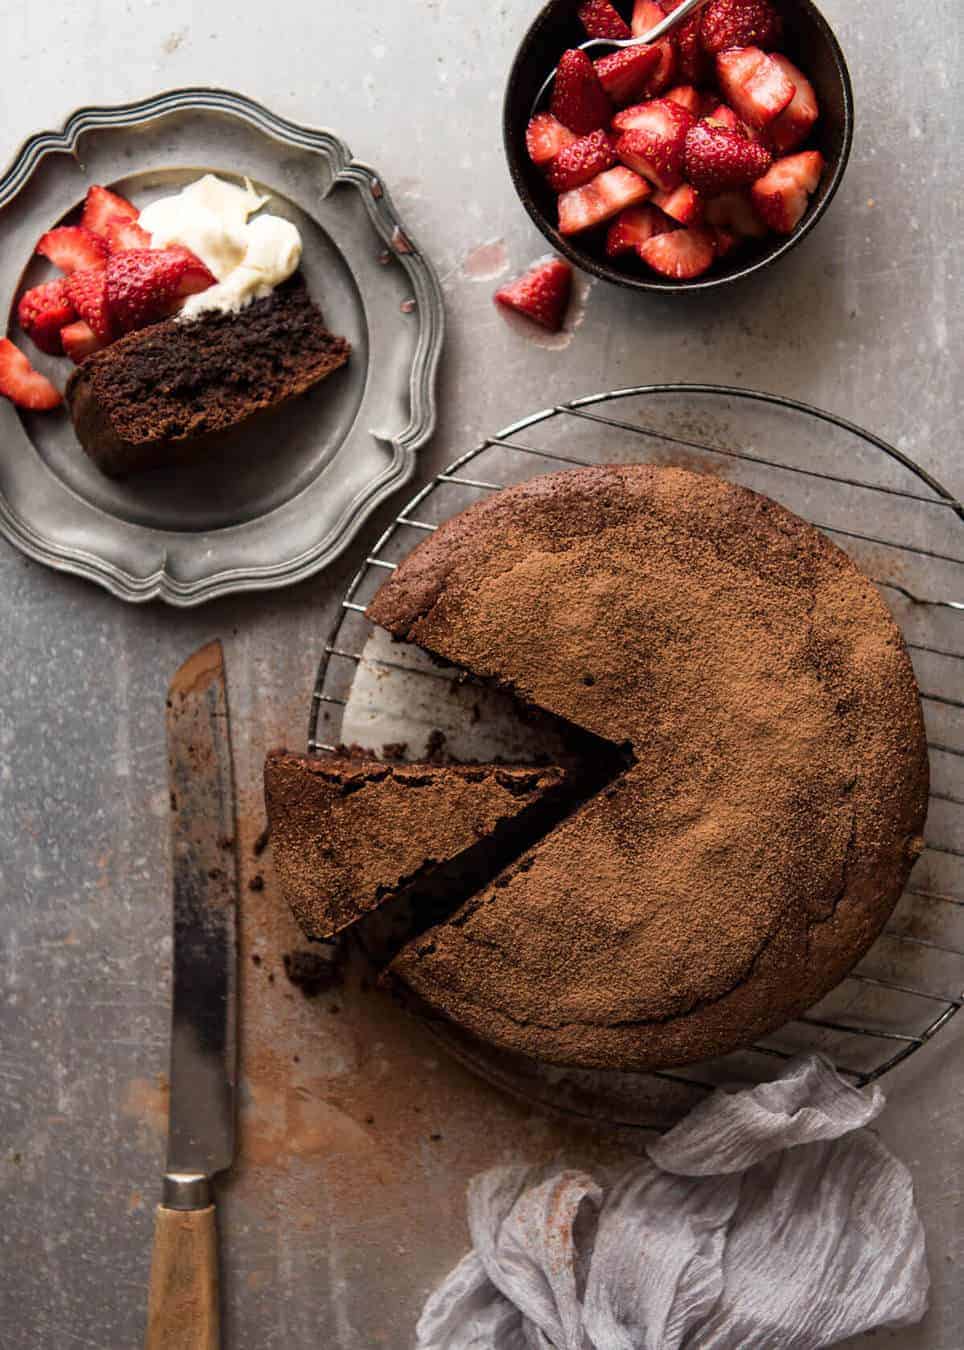 Flourless Chocolate, Olive Oil and Almond Cake